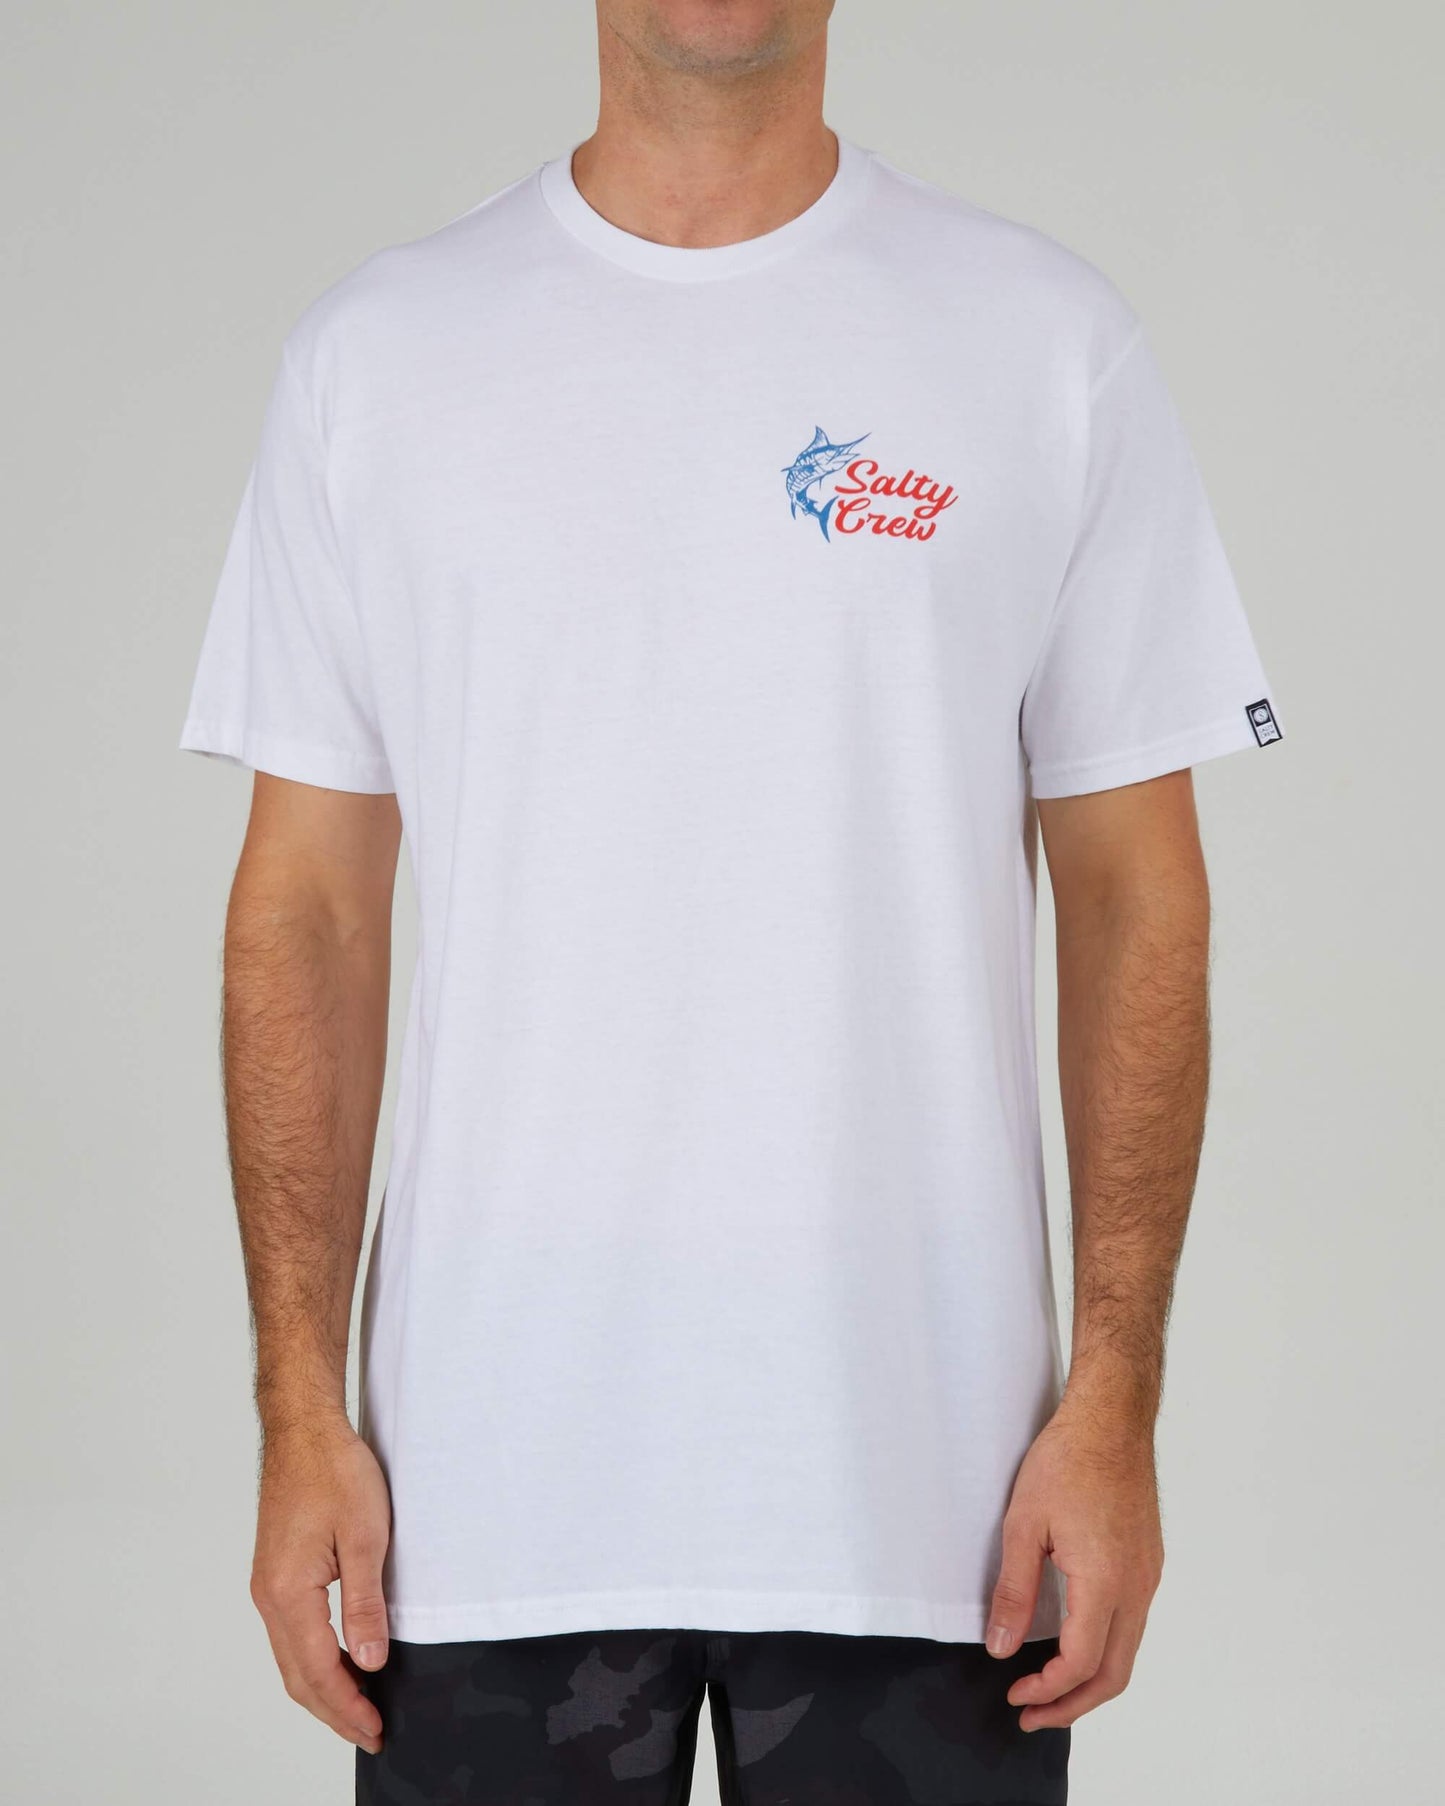 Salty crew T-SHIRTS S/S Jackpot Standard S/S Tee - White in White